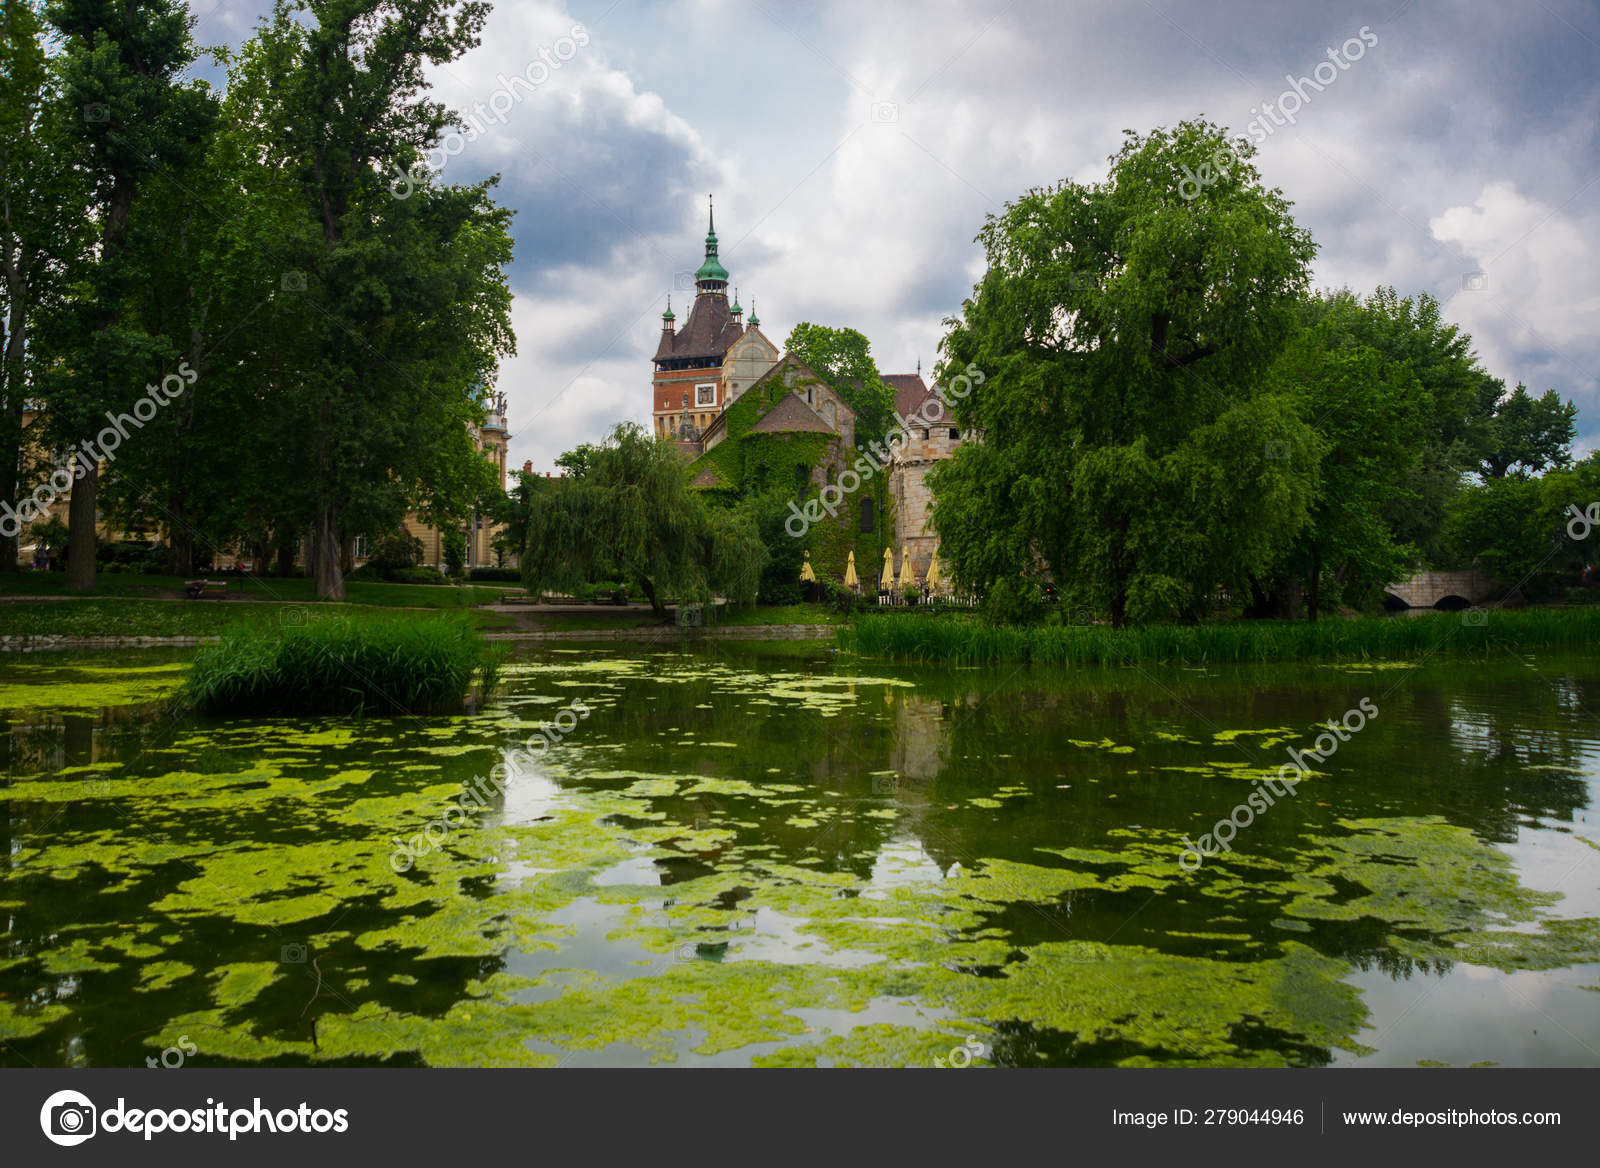 Budapest Hungary Beautiful Landscape With A Pond And An Old Vajdahunyad Castle Stock Photo Image By C A1804 279044946